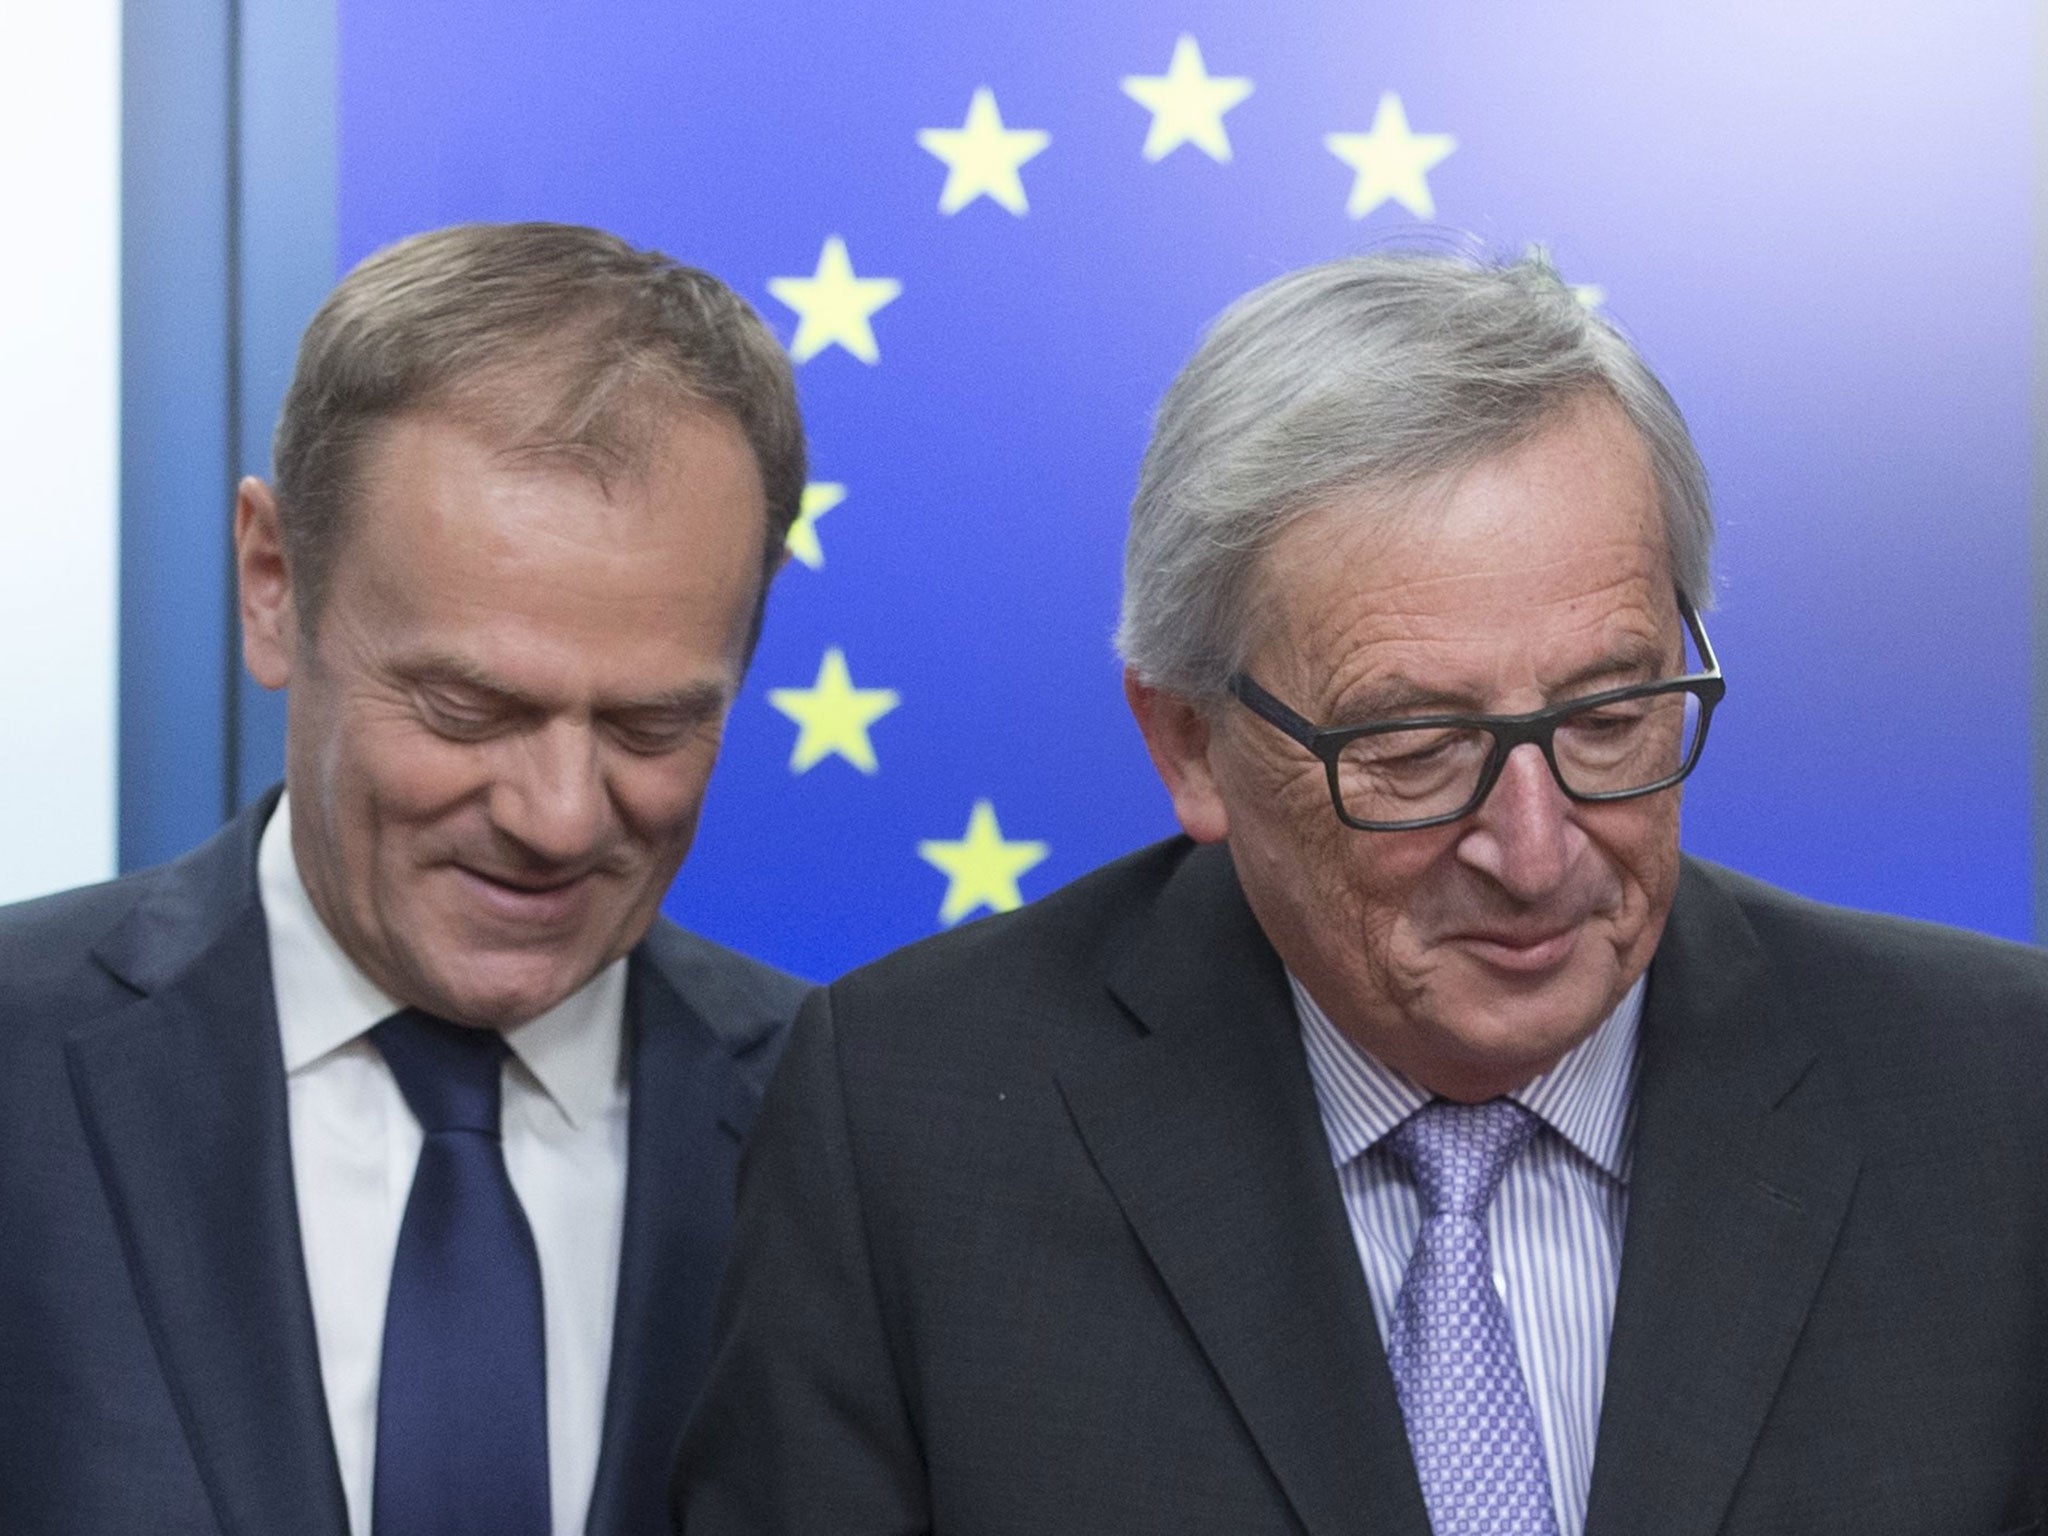 EU Commission President Jean-Claude Juncker (R) and European Council President Donald Tusk, speaking in Brussels, announce an EU Summit on Brexit will take place on 29 April